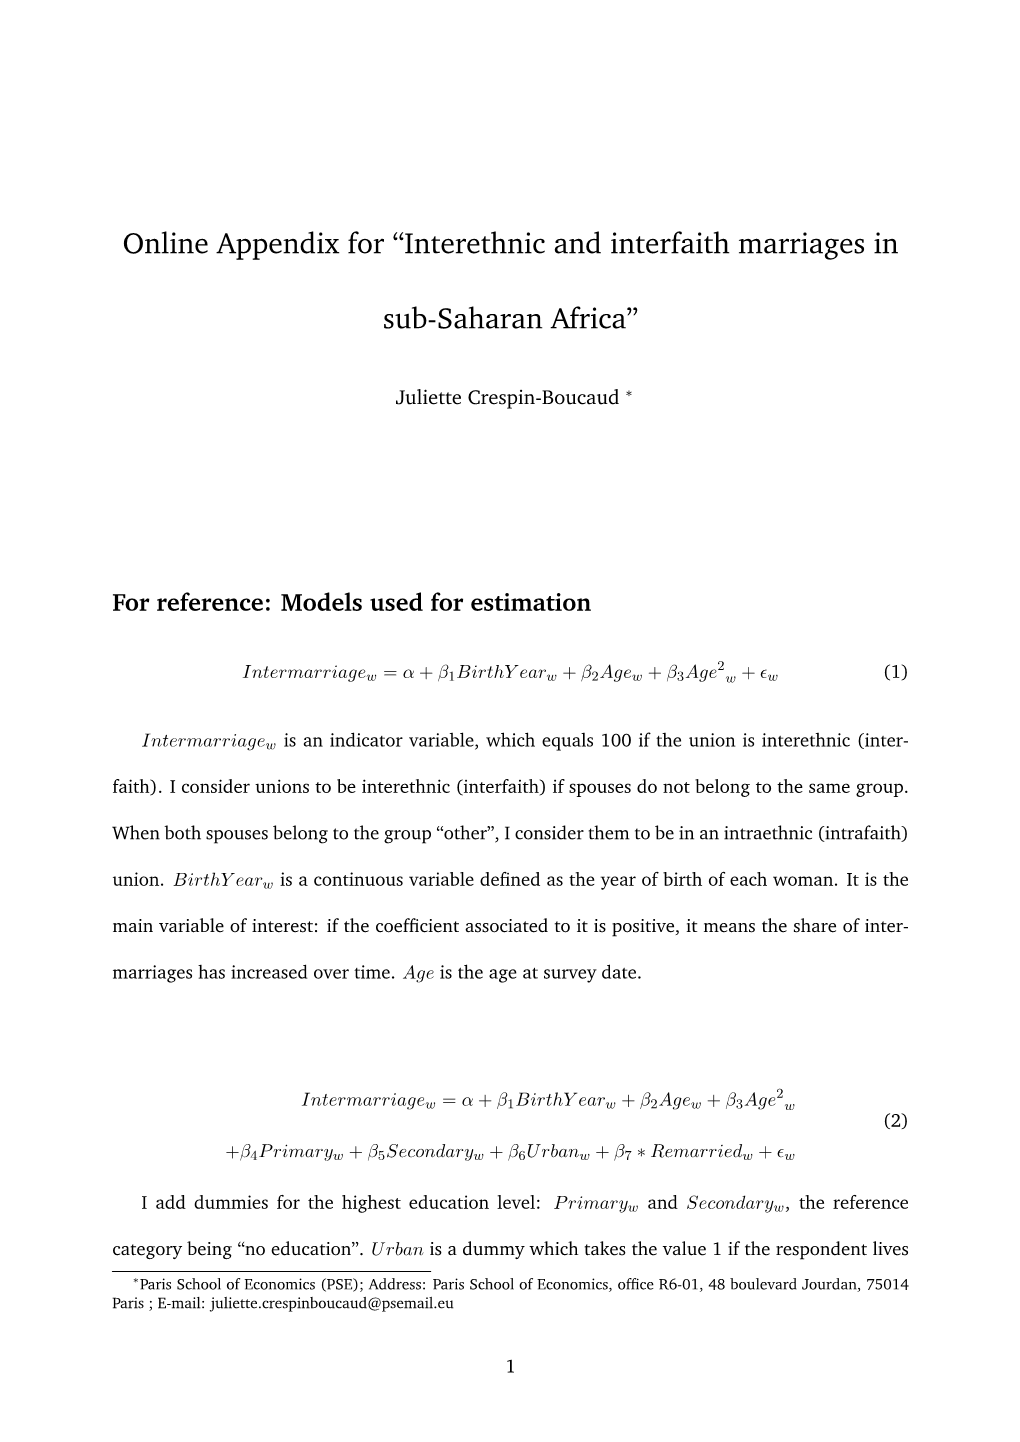 Online Appendix for “Interethnic and Interfaith Marriages In